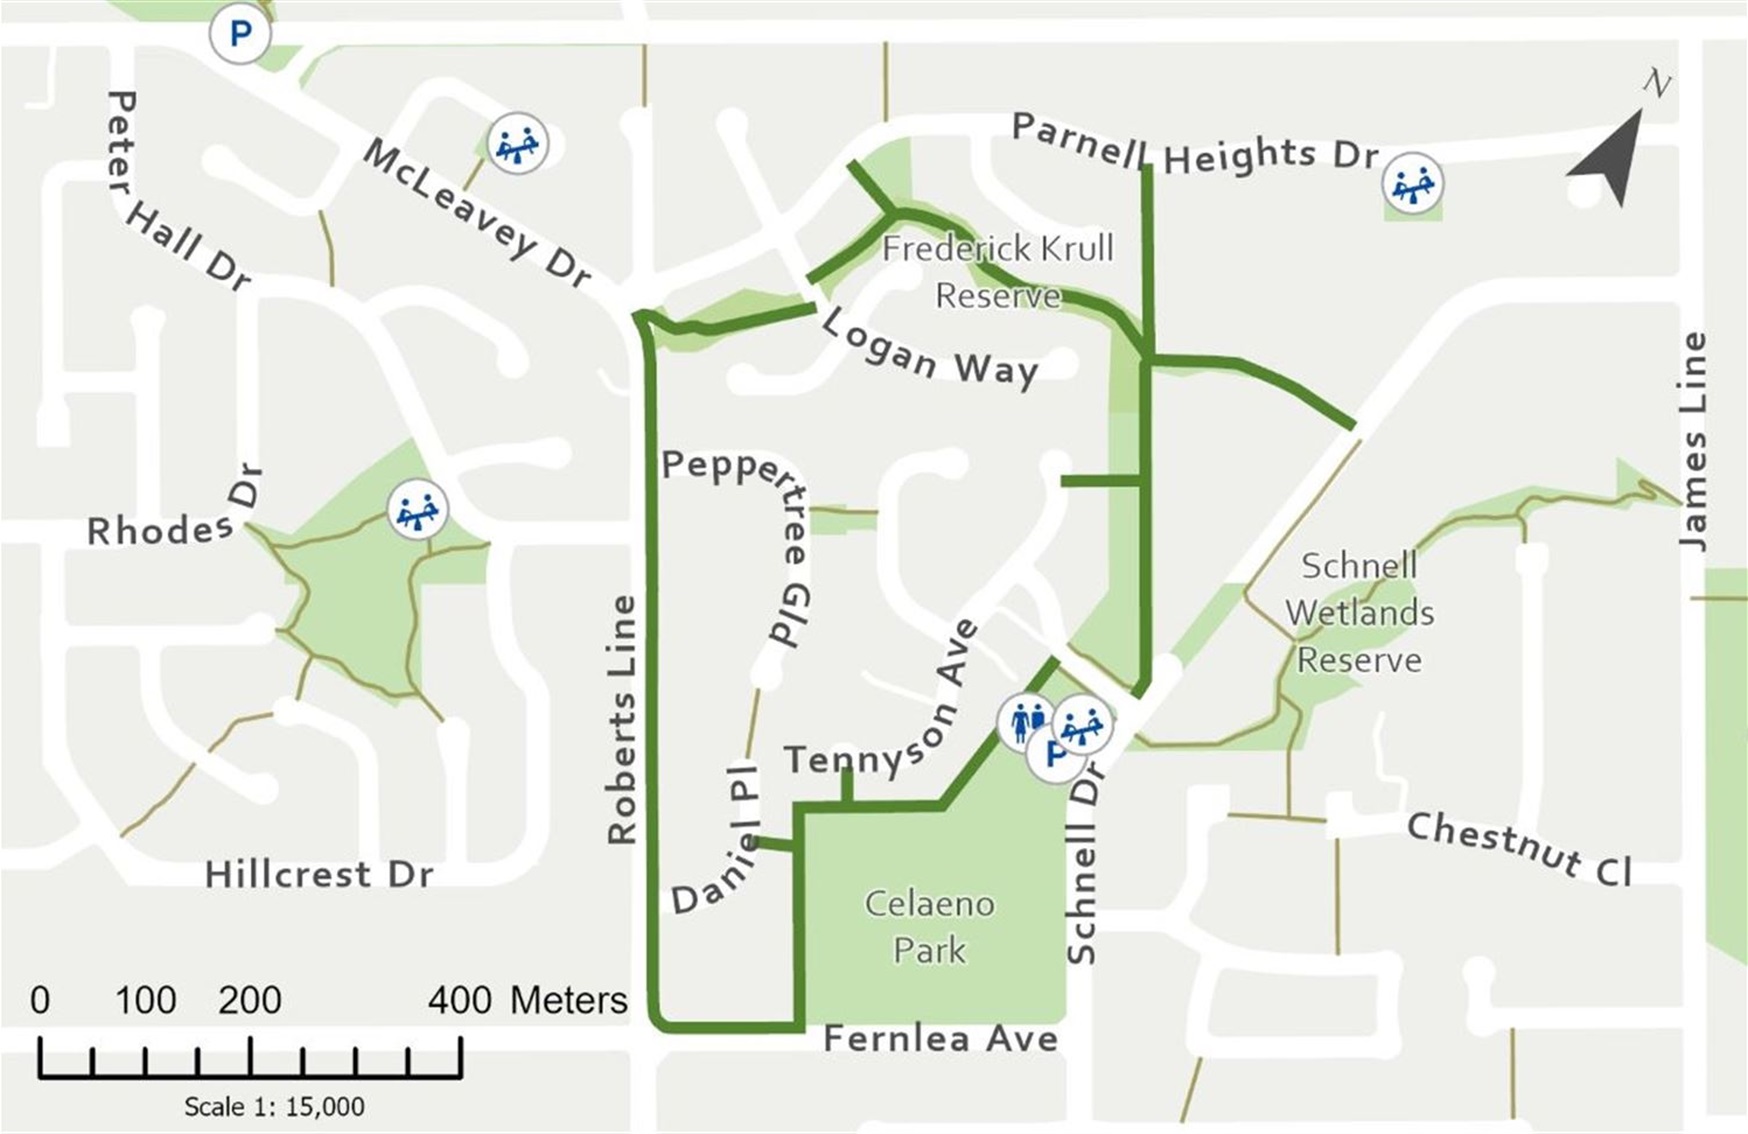 Map shows walkway linking some parks.